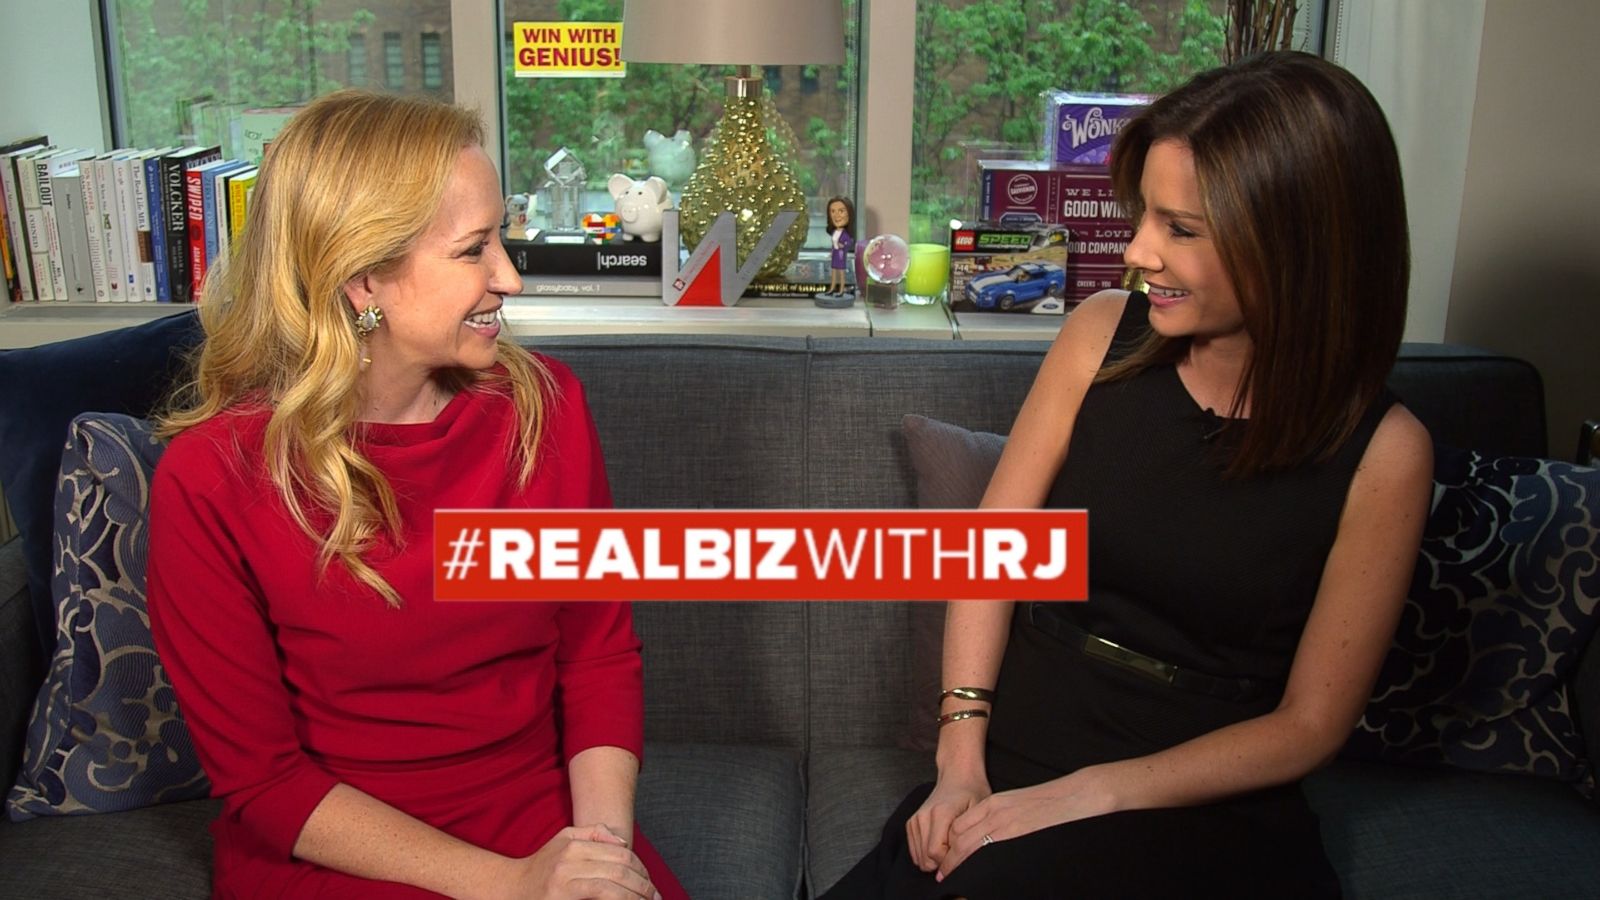 GLAMSQUAD, Gilt Groupe Co-Founder on 'Real Biz With Rebecca Jarvis'